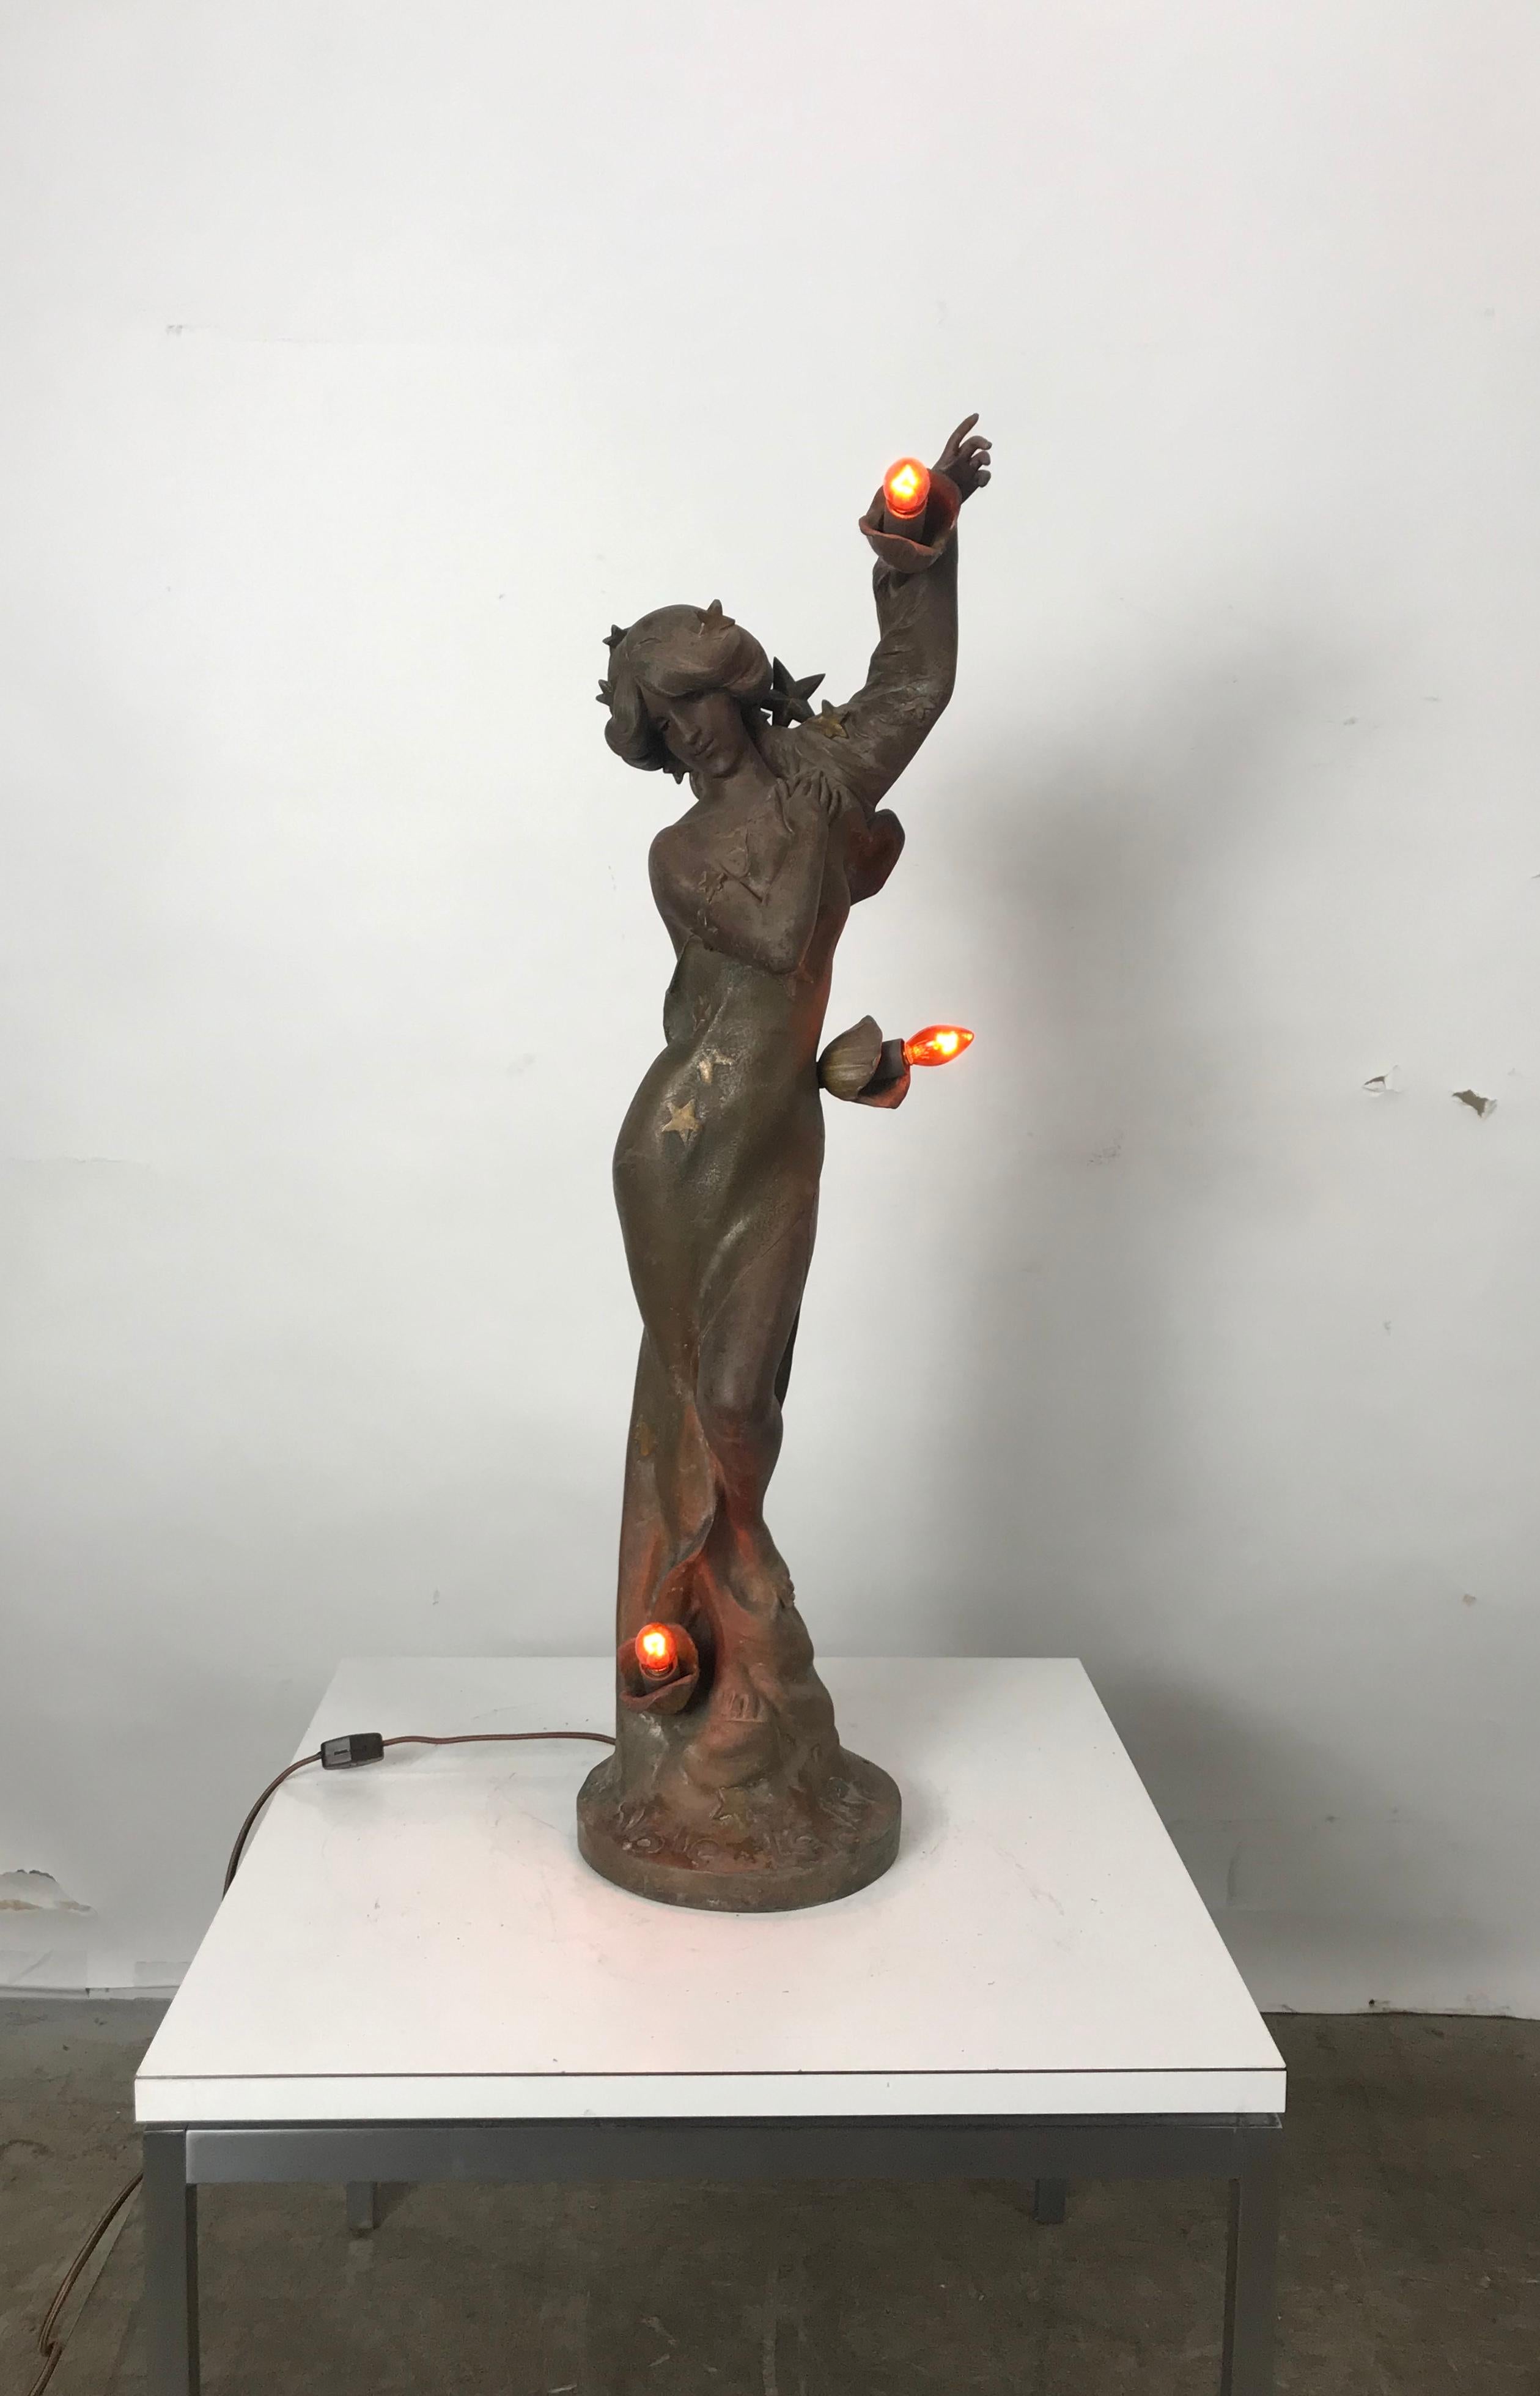 Early 20th Century French Art Nouveau Figural Spelter Newel Post Lamp, Paris Foundry Mark